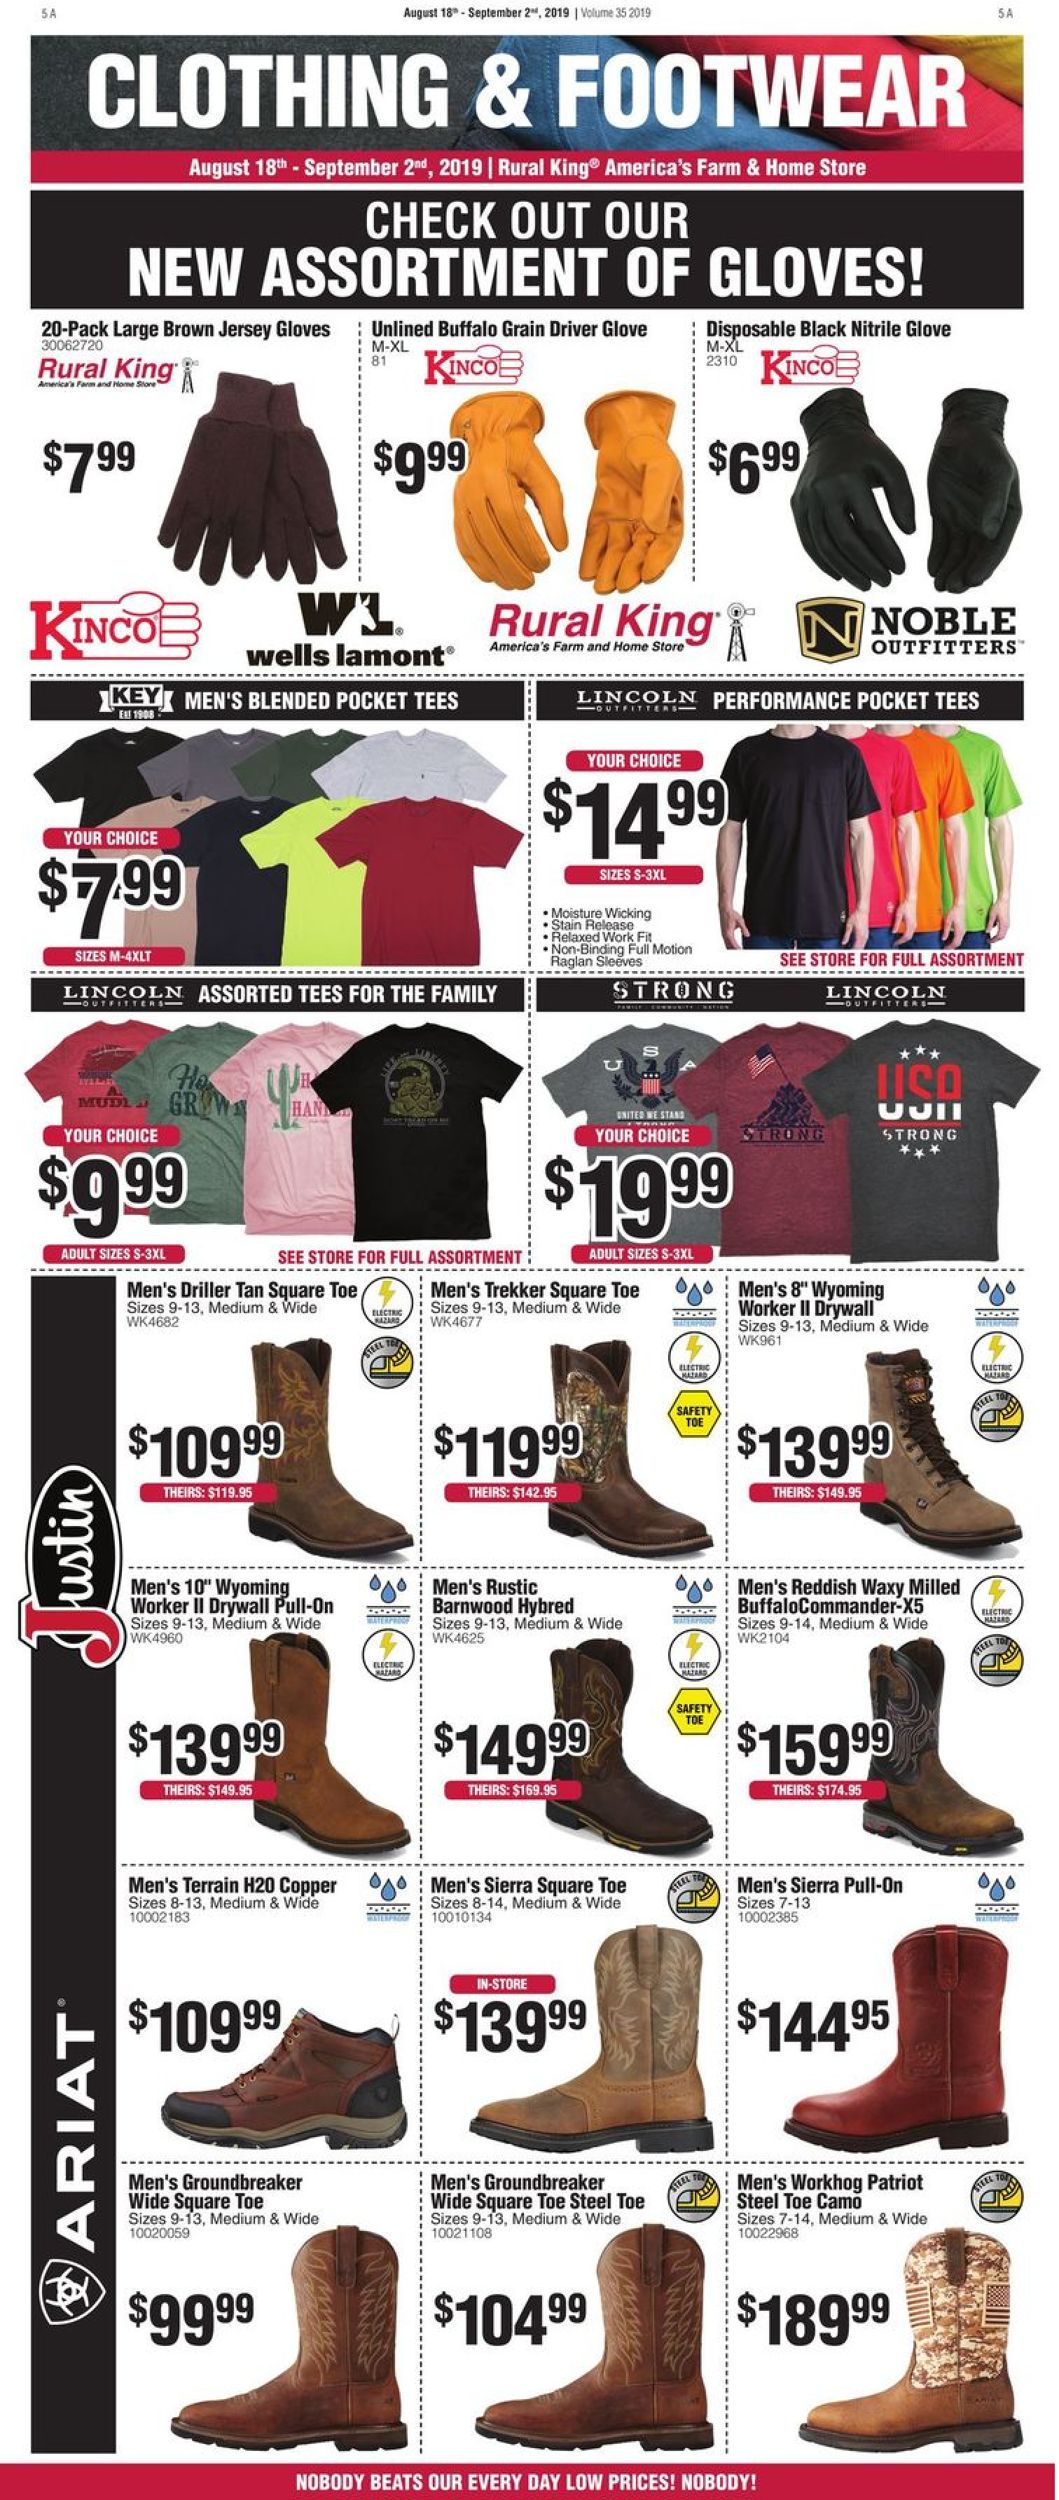 Rural King Current weekly ad 08/18 - 09 